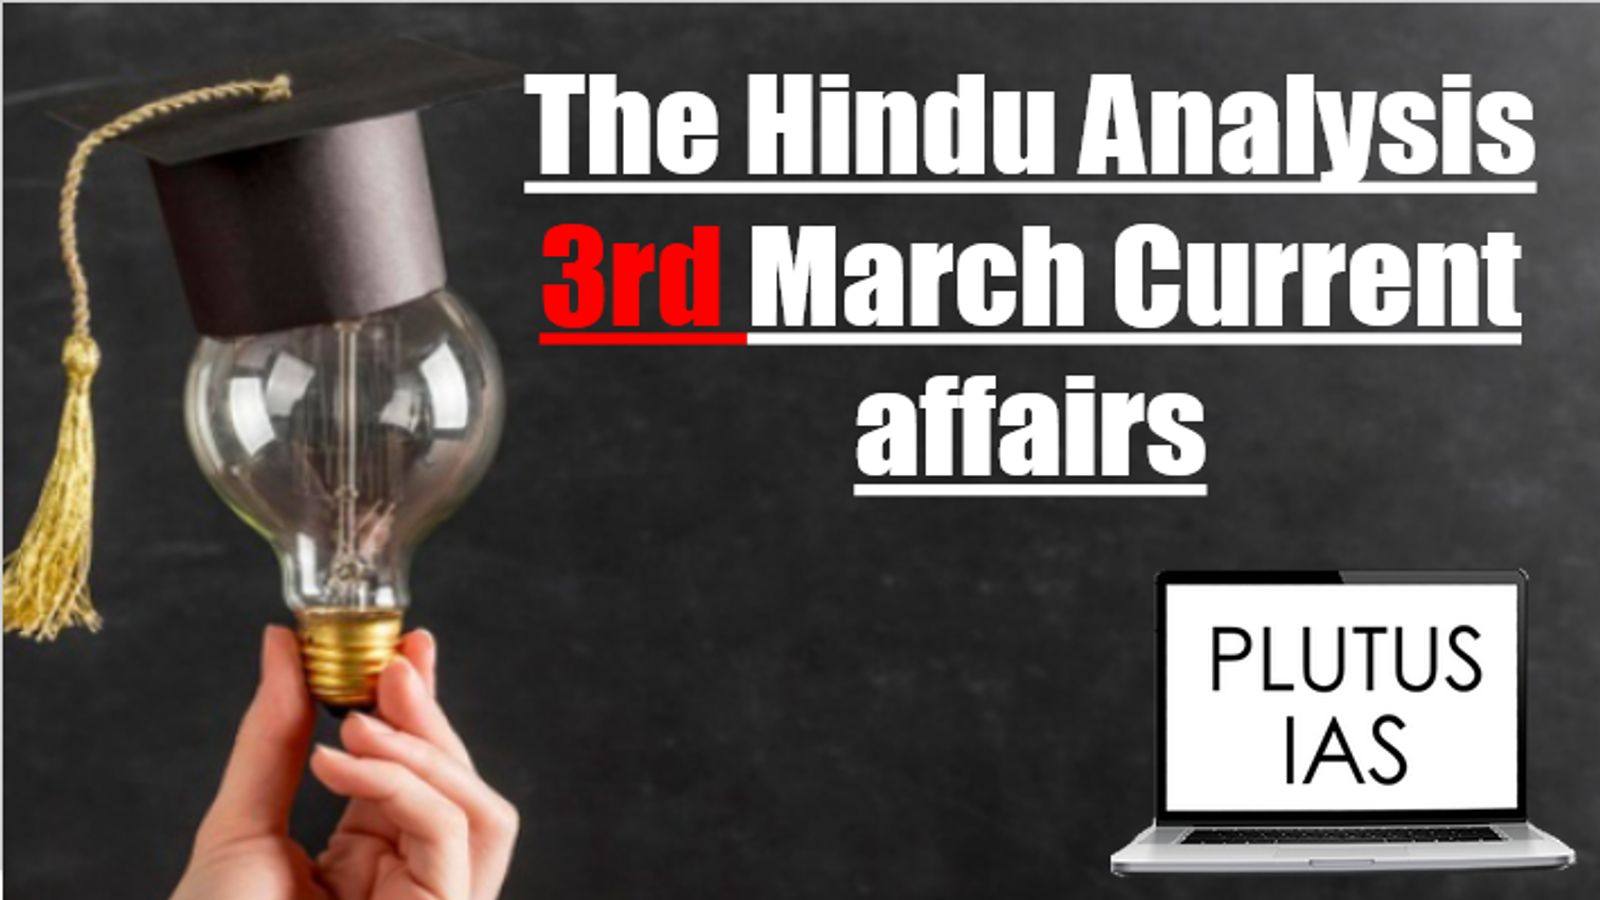 The Hindu Analysis 3rd March